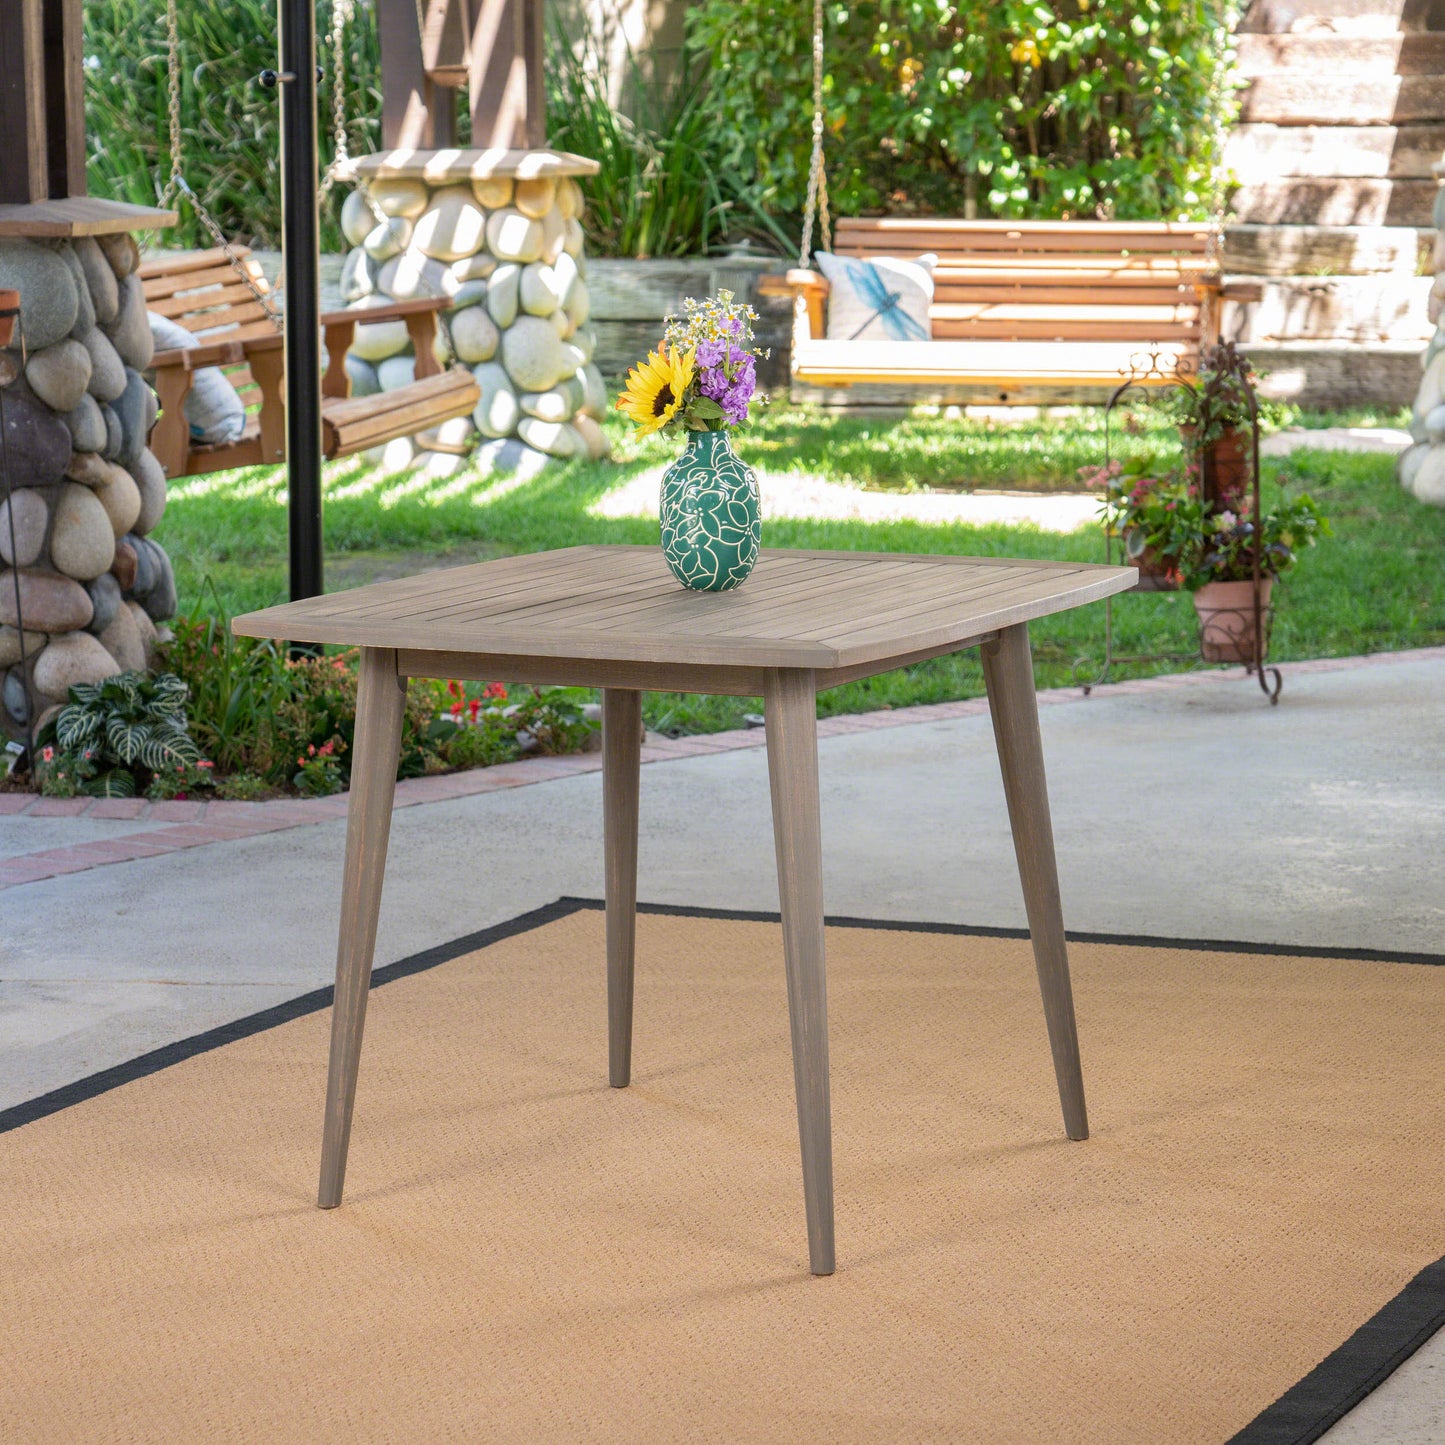 Stanford Outdoor Square Acacia Wood Dining Table with Straight Legs